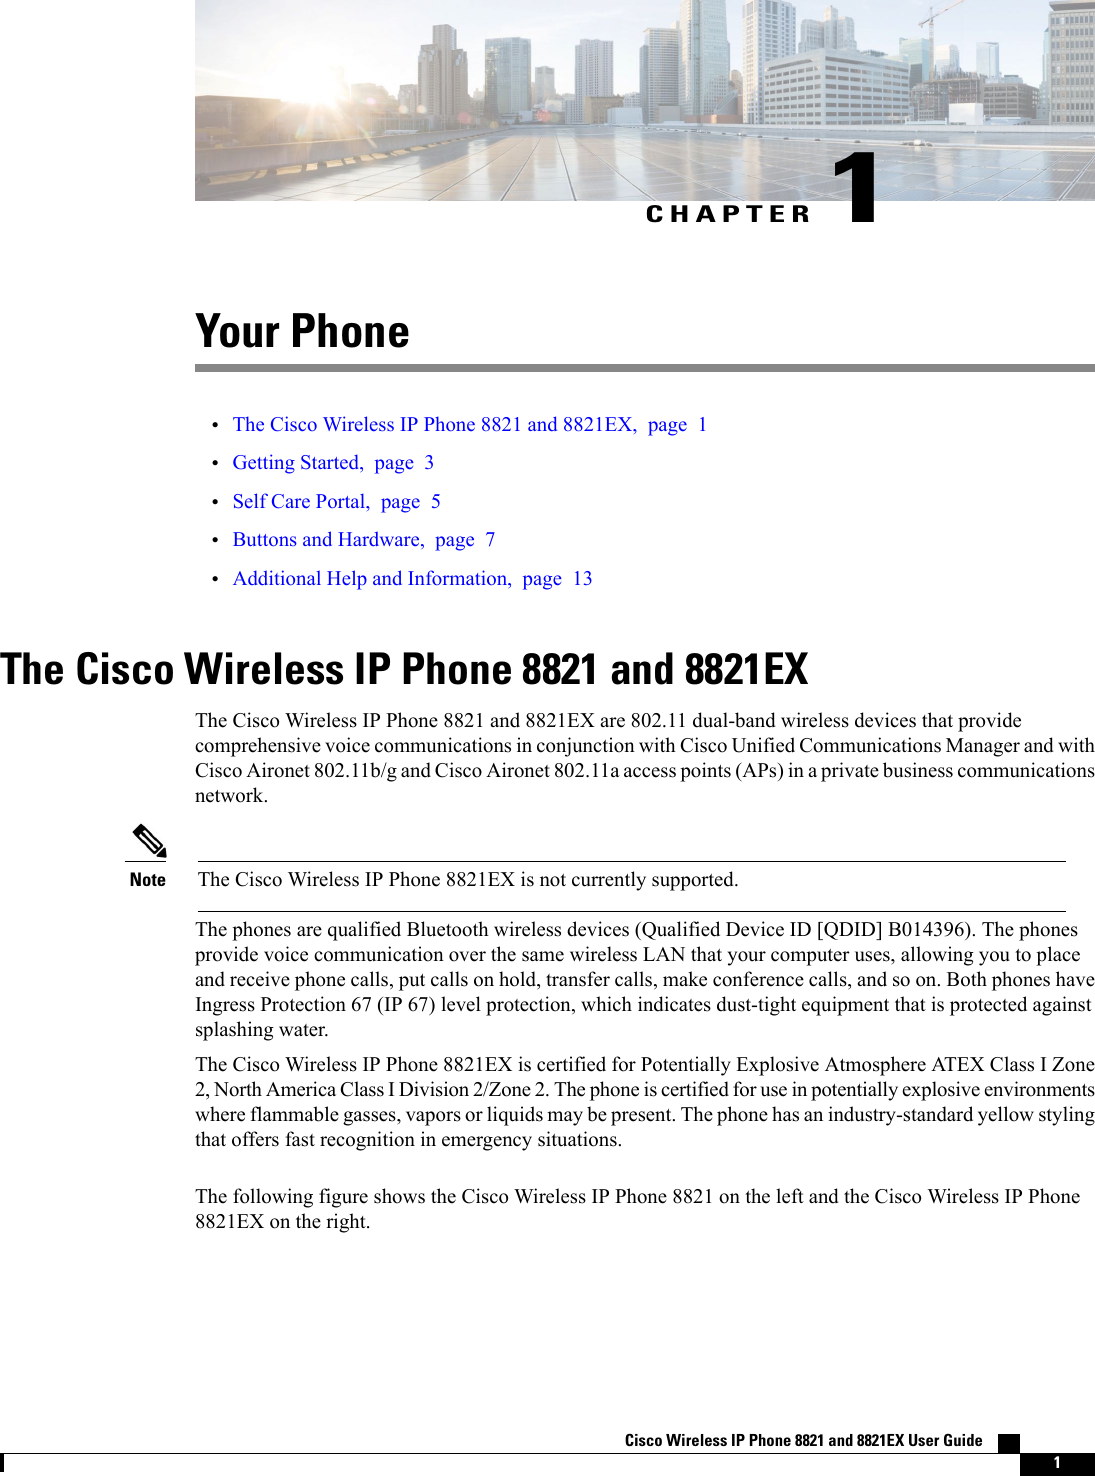 CHAPTER 1Your Phone•The Cisco Wireless IP Phone 8821 and 8821EX, page 1•Getting Started, page 3•Self Care Portal, page 5•Buttons and Hardware, page 7•Additional Help and Information, page 13The Cisco Wireless IP Phone 8821 and 8821EXThe Cisco Wireless IP Phone 8821 and 8821EX are 802.11 dual-band wireless devices that providecomprehensive voice communications in conjunction with Cisco Unified Communications Manager and withCisco Aironet 802.11b/g and Cisco Aironet 802.11a access points (APs) in a private business communicationsnetwork.The Cisco Wireless IP Phone 8821EX is not currently supported.NoteThe phones are qualified Bluetooth wireless devices (Qualified Device ID [QDID] B014396). The phonesprovide voice communication over the same wireless LAN that your computer uses, allowing you to placeand receive phone calls, put calls on hold, transfer calls, make conference calls, and so on. Both phones haveIngress Protection 67 (IP 67) level protection, which indicates dust-tight equipment that is protected againstsplashing water.The Cisco Wireless IP Phone 8821EX is certified for Potentially Explosive Atmosphere ATEX Class I Zone2, North America Class IDivision 2/Zone 2. The phone is certified for use in potentially explosive environmentswhere flammable gasses, vapors or liquids may be present. The phone has an industry-standard yellow stylingthat offers fast recognition in emergency situations.The following figure shows the Cisco Wireless IP Phone 8821 on the left and the Cisco Wireless IP Phone8821EX on the right.Cisco Wireless IP Phone 8821 and 8821EX User Guide    1